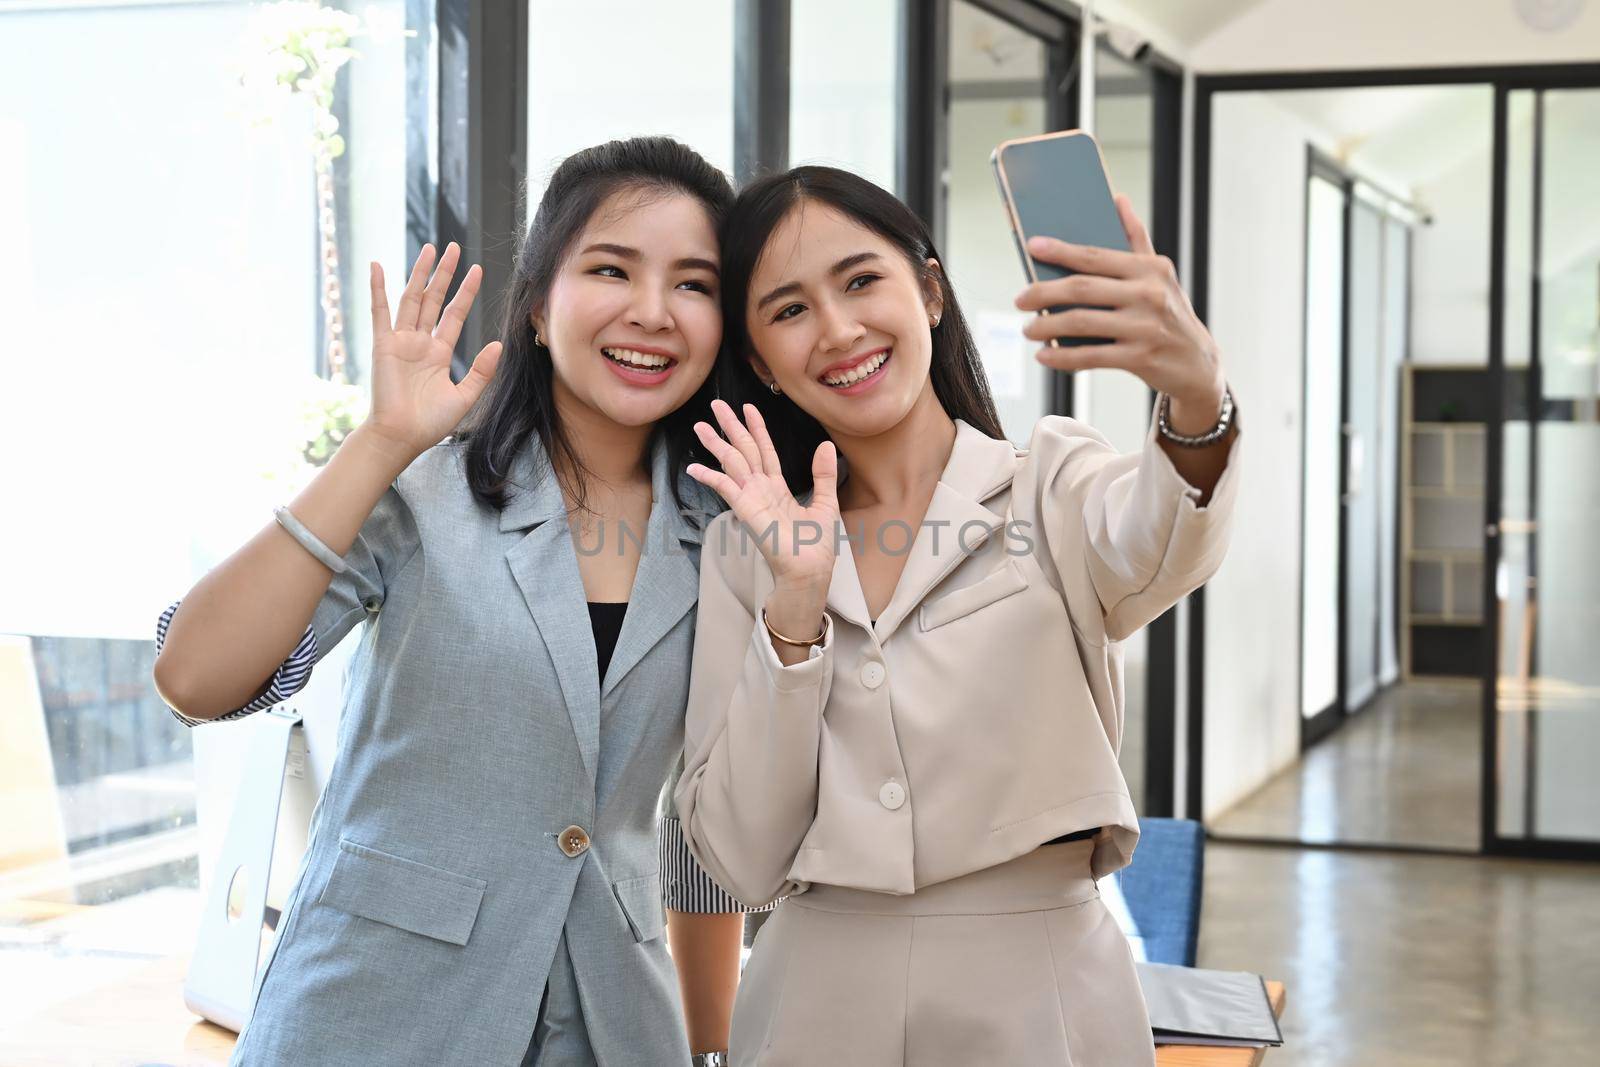 Two young women taking selfie with smartphone.